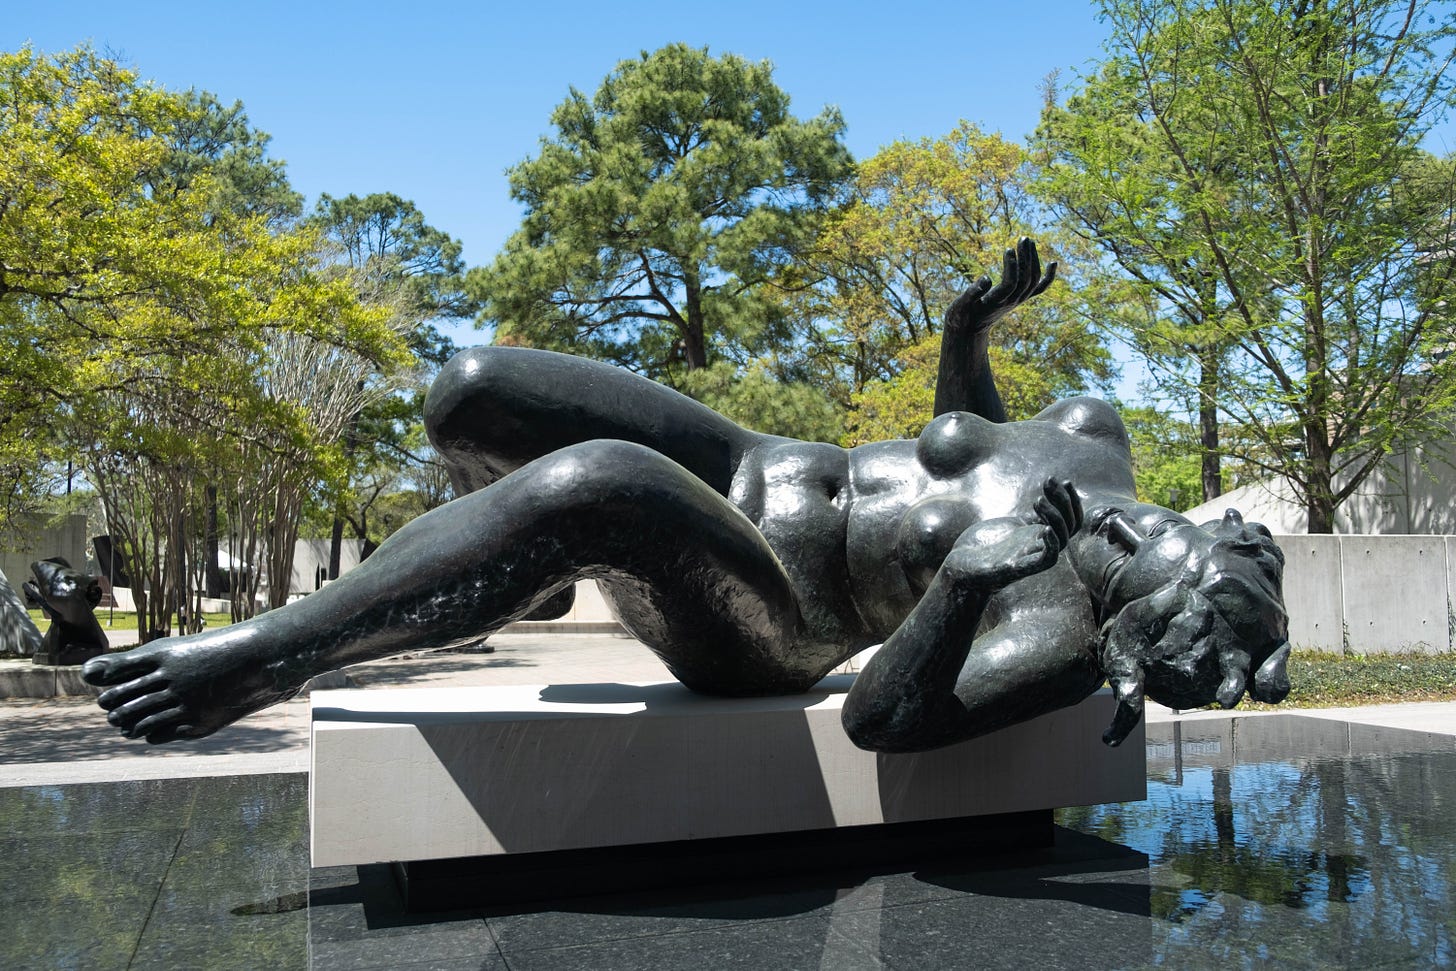 A reclining bronze nude,  Aristide Maillol’s La Rivière, set against green leafy trees in the in the sculpture garden at The Museum of Fine Arts, Houston. April 3, 2022.  